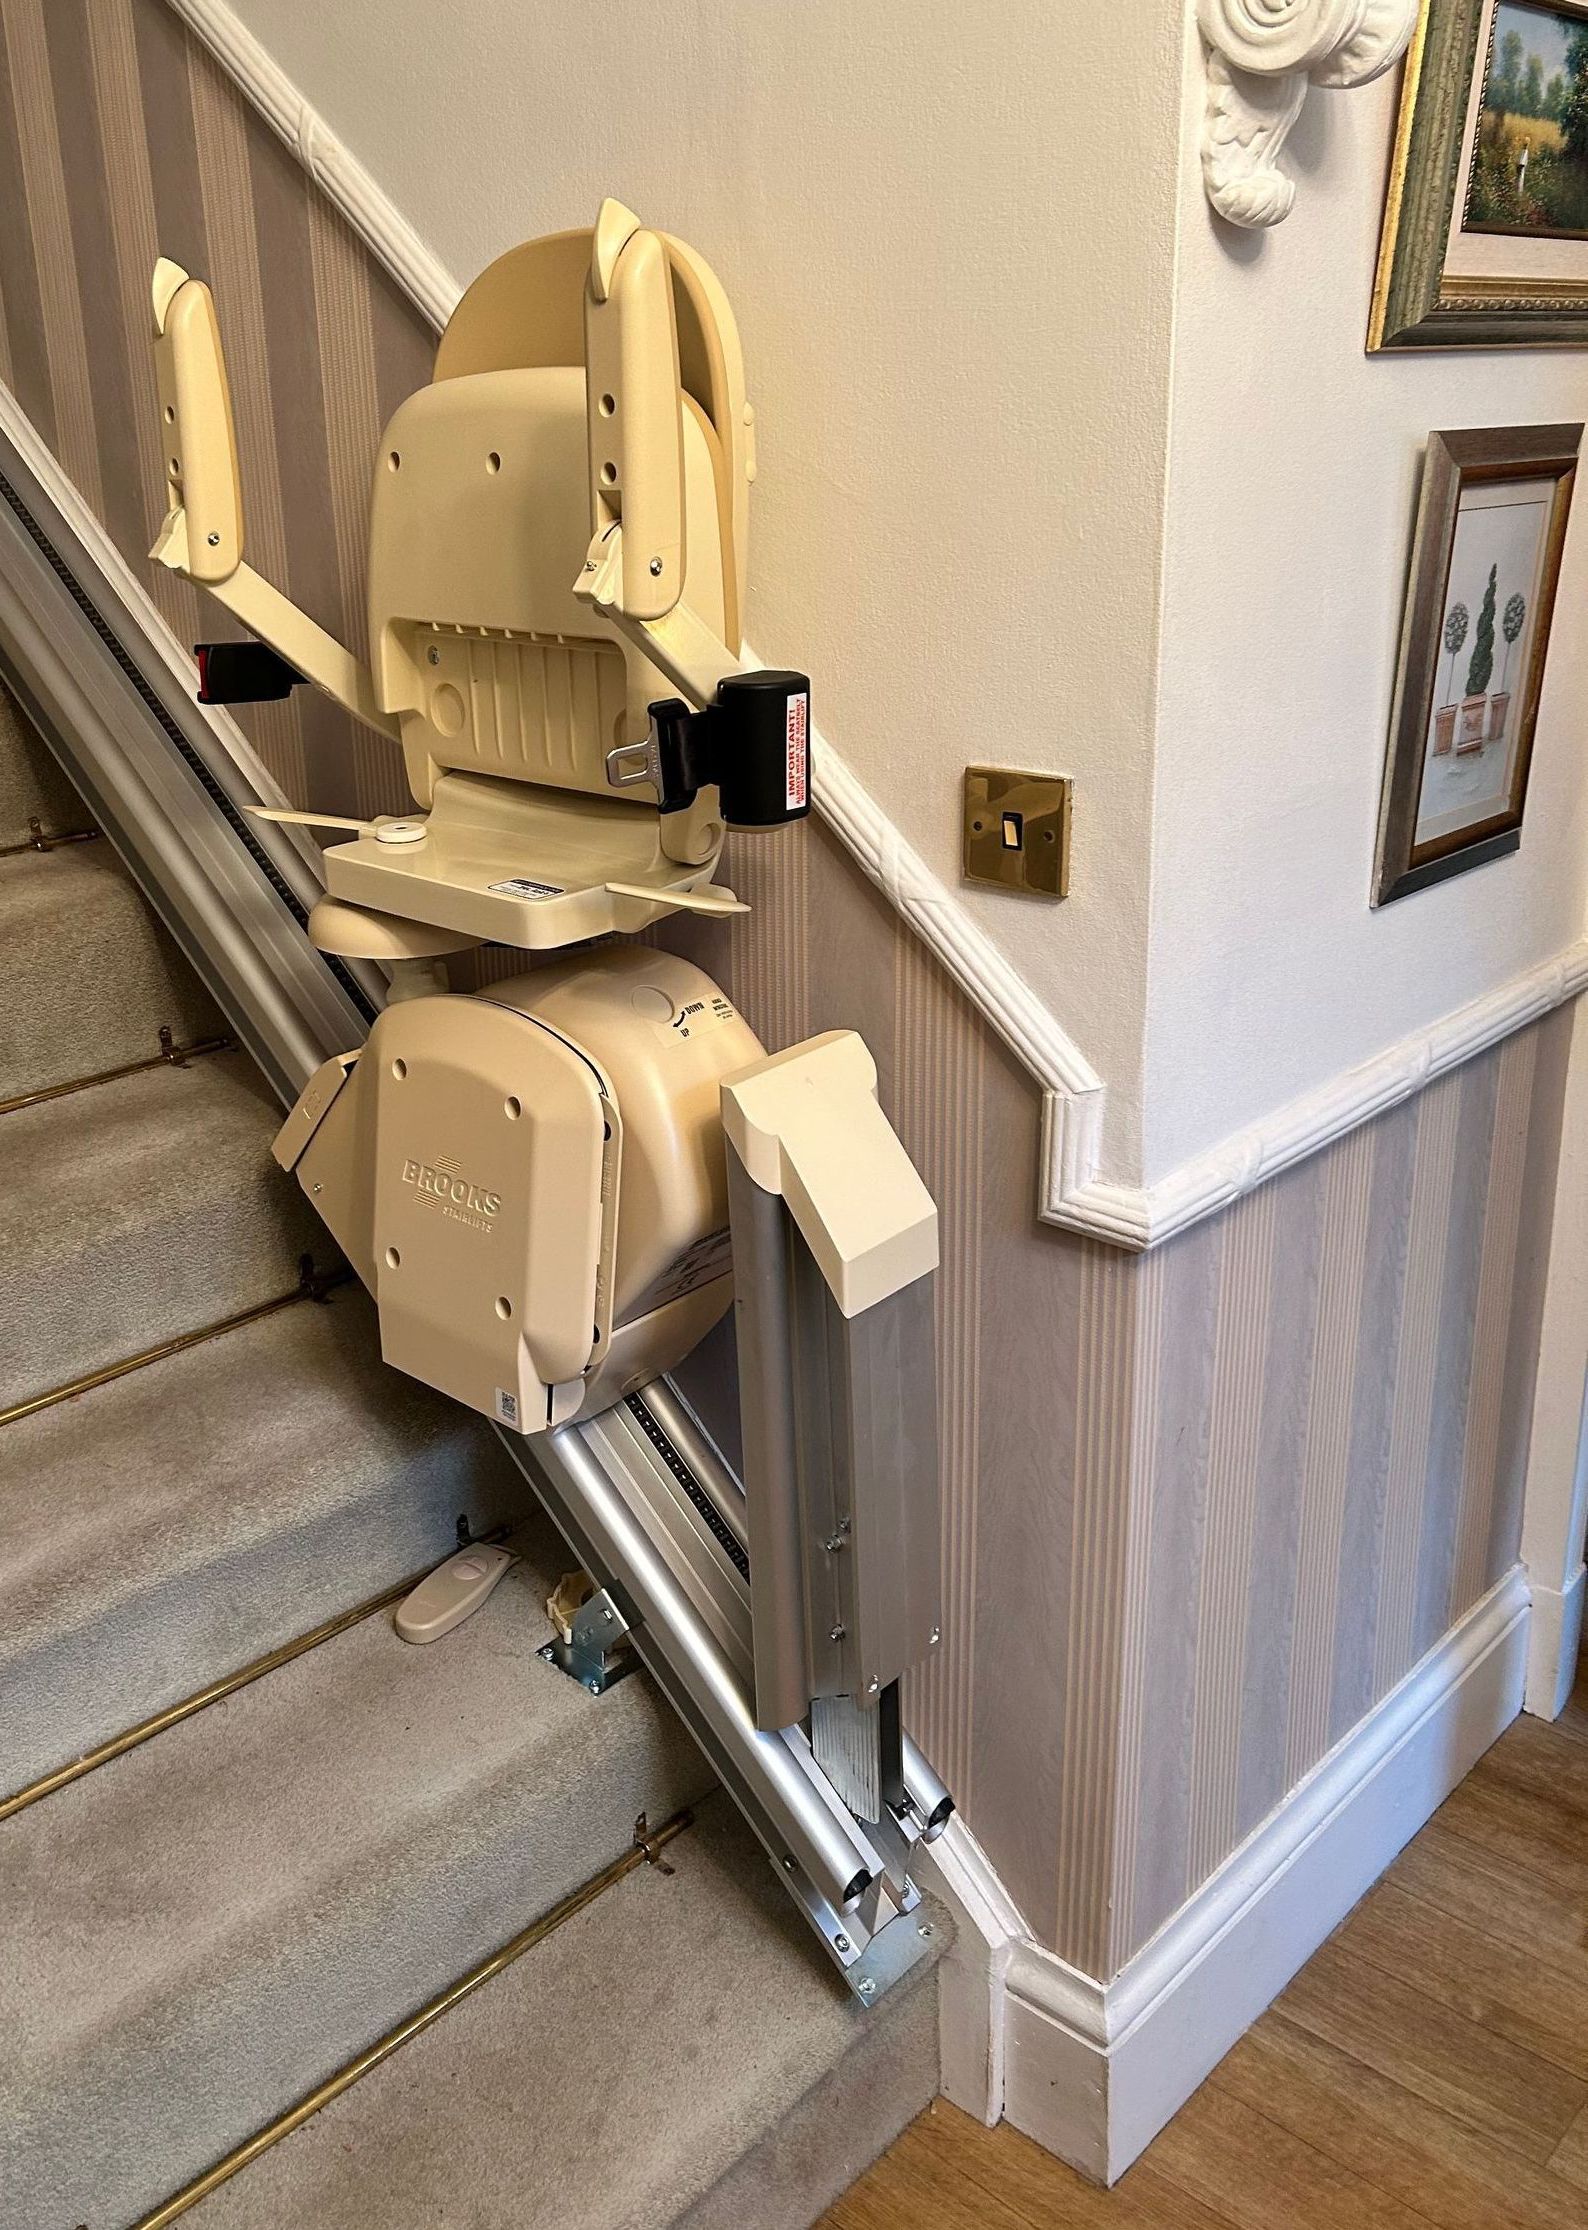 Hinged stairlift rail to clear door threshold or passageway.